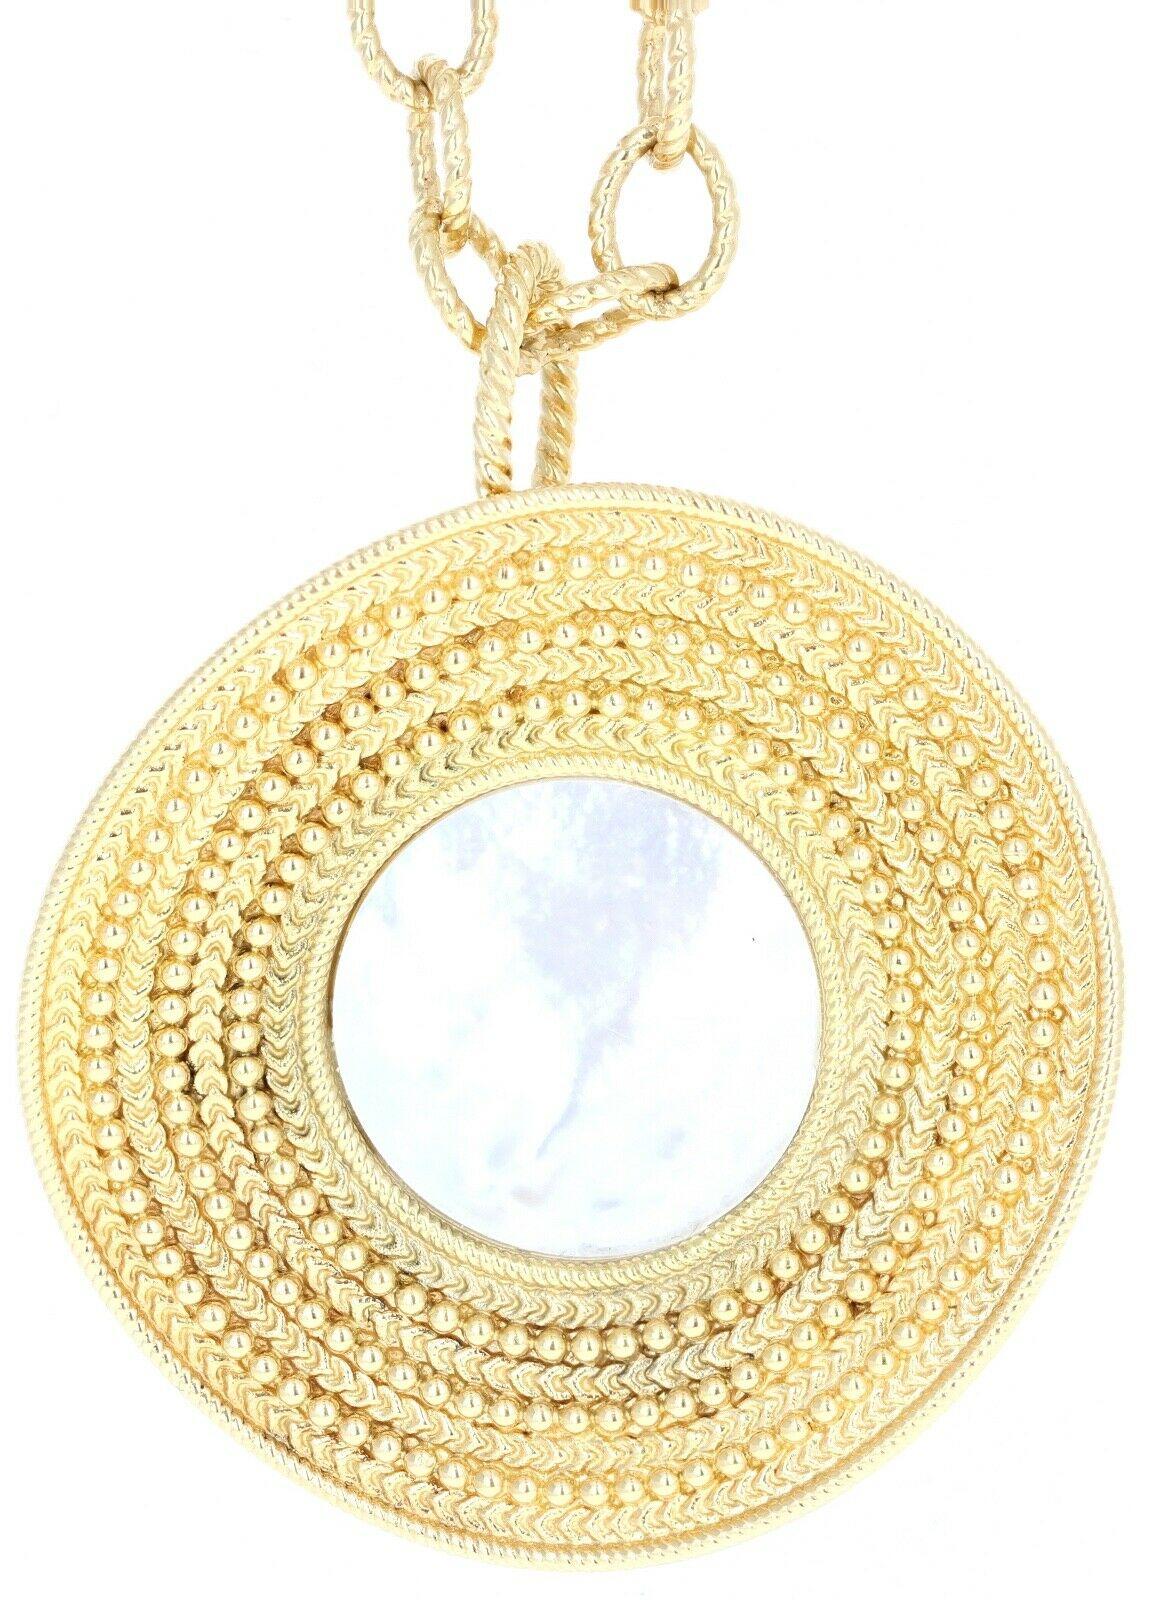 Carrera 18K Yellow Gold & Mother Of Pearl Ruedo Maxi Pendant Necklace 123.8g

MSRP $29,000


For sale is a Carrera mother of pearl ruedo maxi pendant necklace. 
The necklace is 32' inches in length 
The pendant is 2.5' inches including the